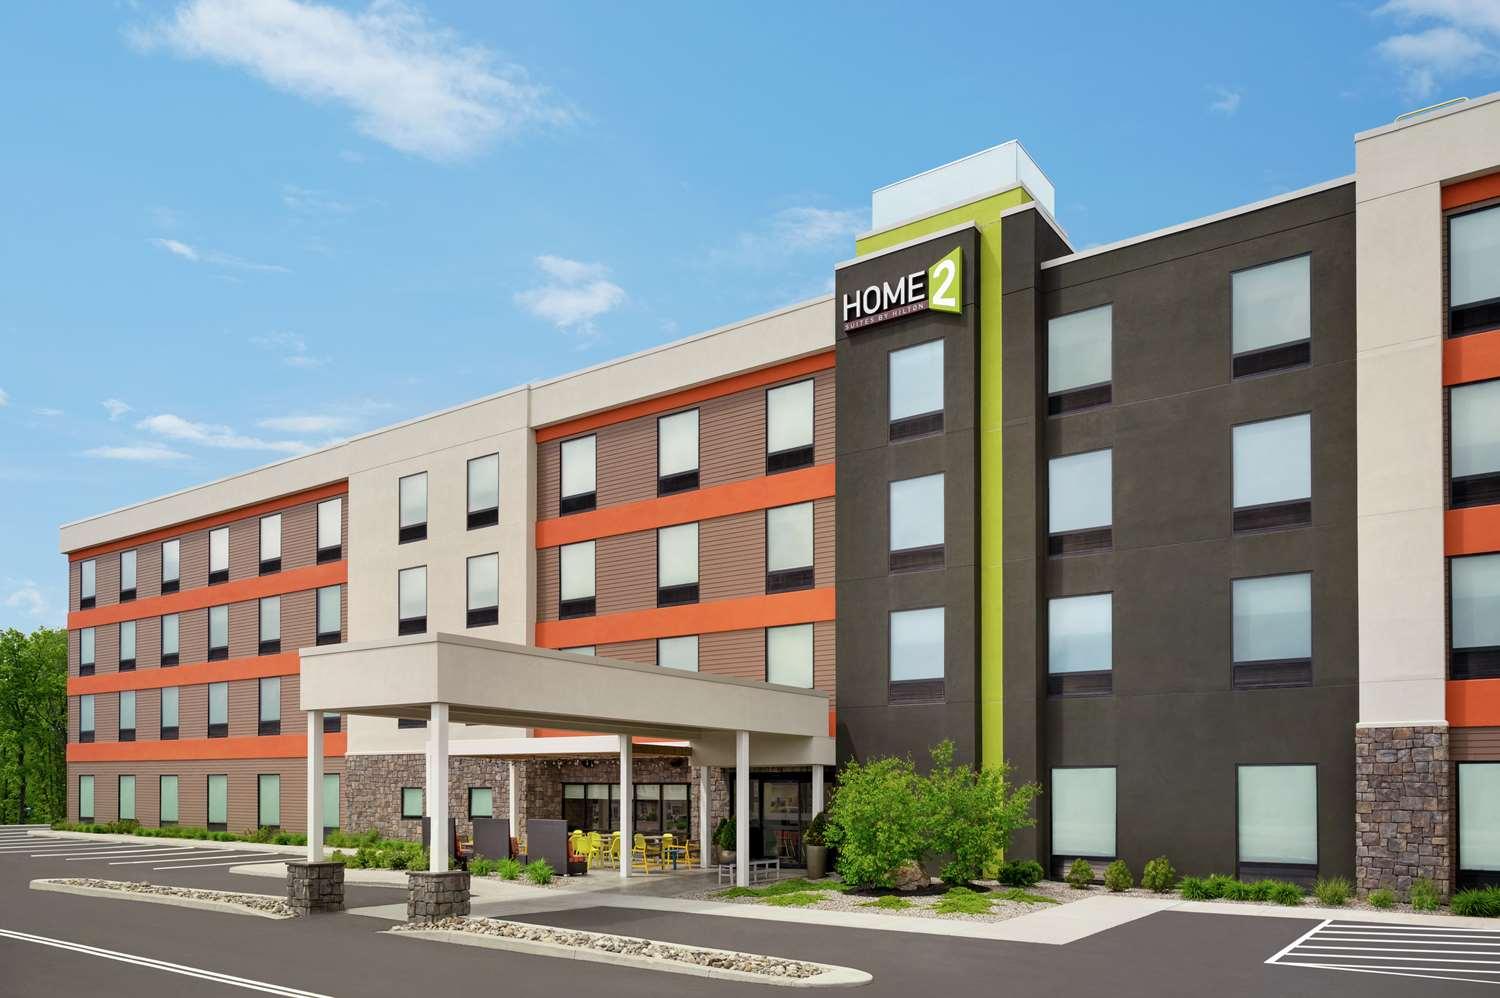 Home2 Suites by Hilton Rochester Greece in Rochester, NY